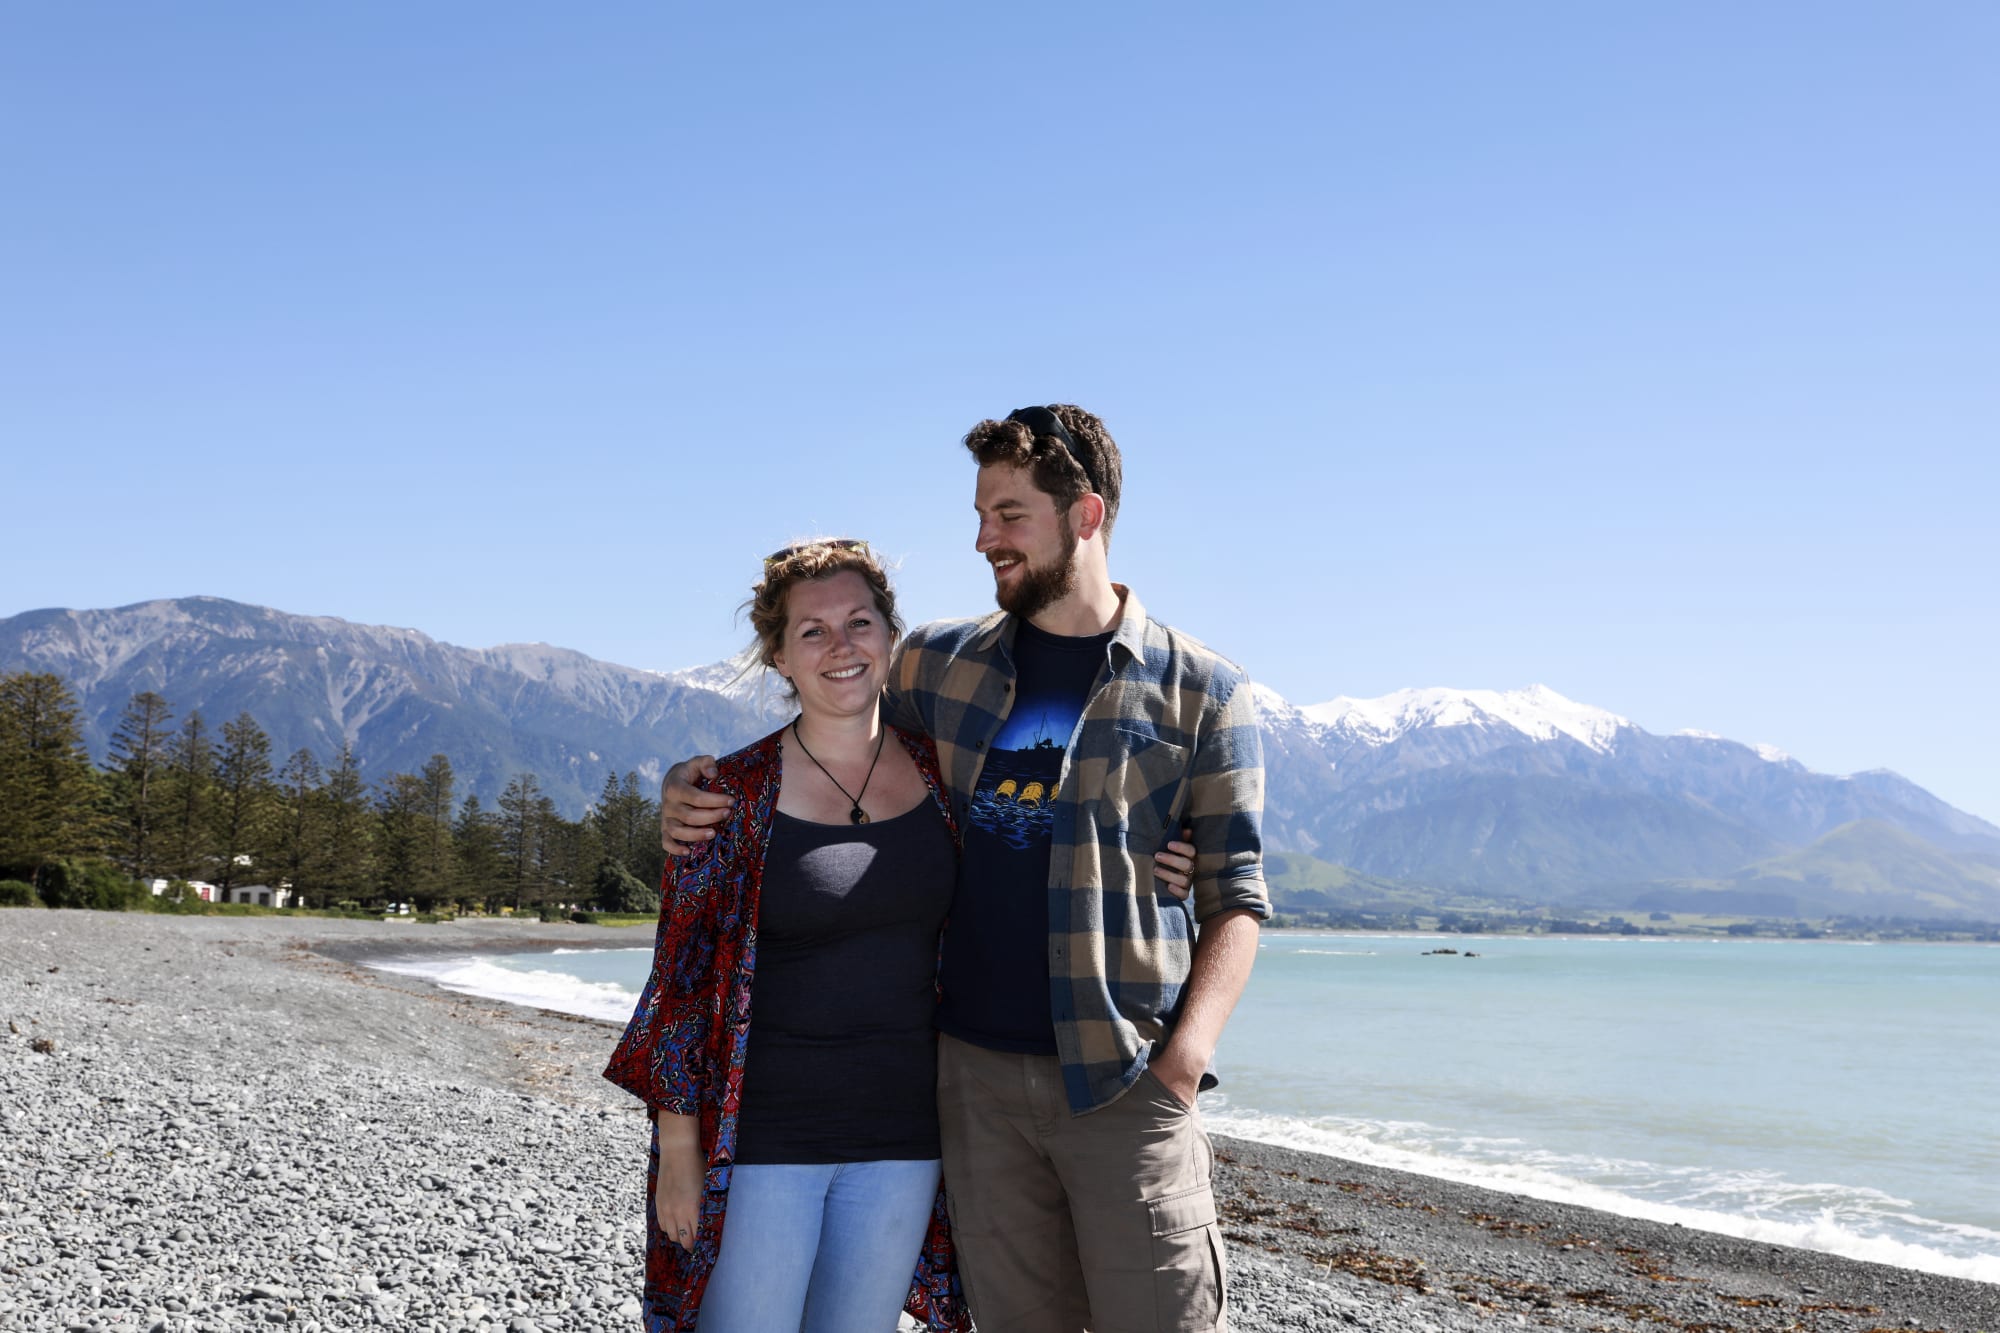 Jenny Worth and Nick Schofield, both from the U.K were working for Encounter Kaikoura at the time of the earthquake. At the end of their visa's they returned to the U.K, arranged new visa's and returned to their much loved home away from home.